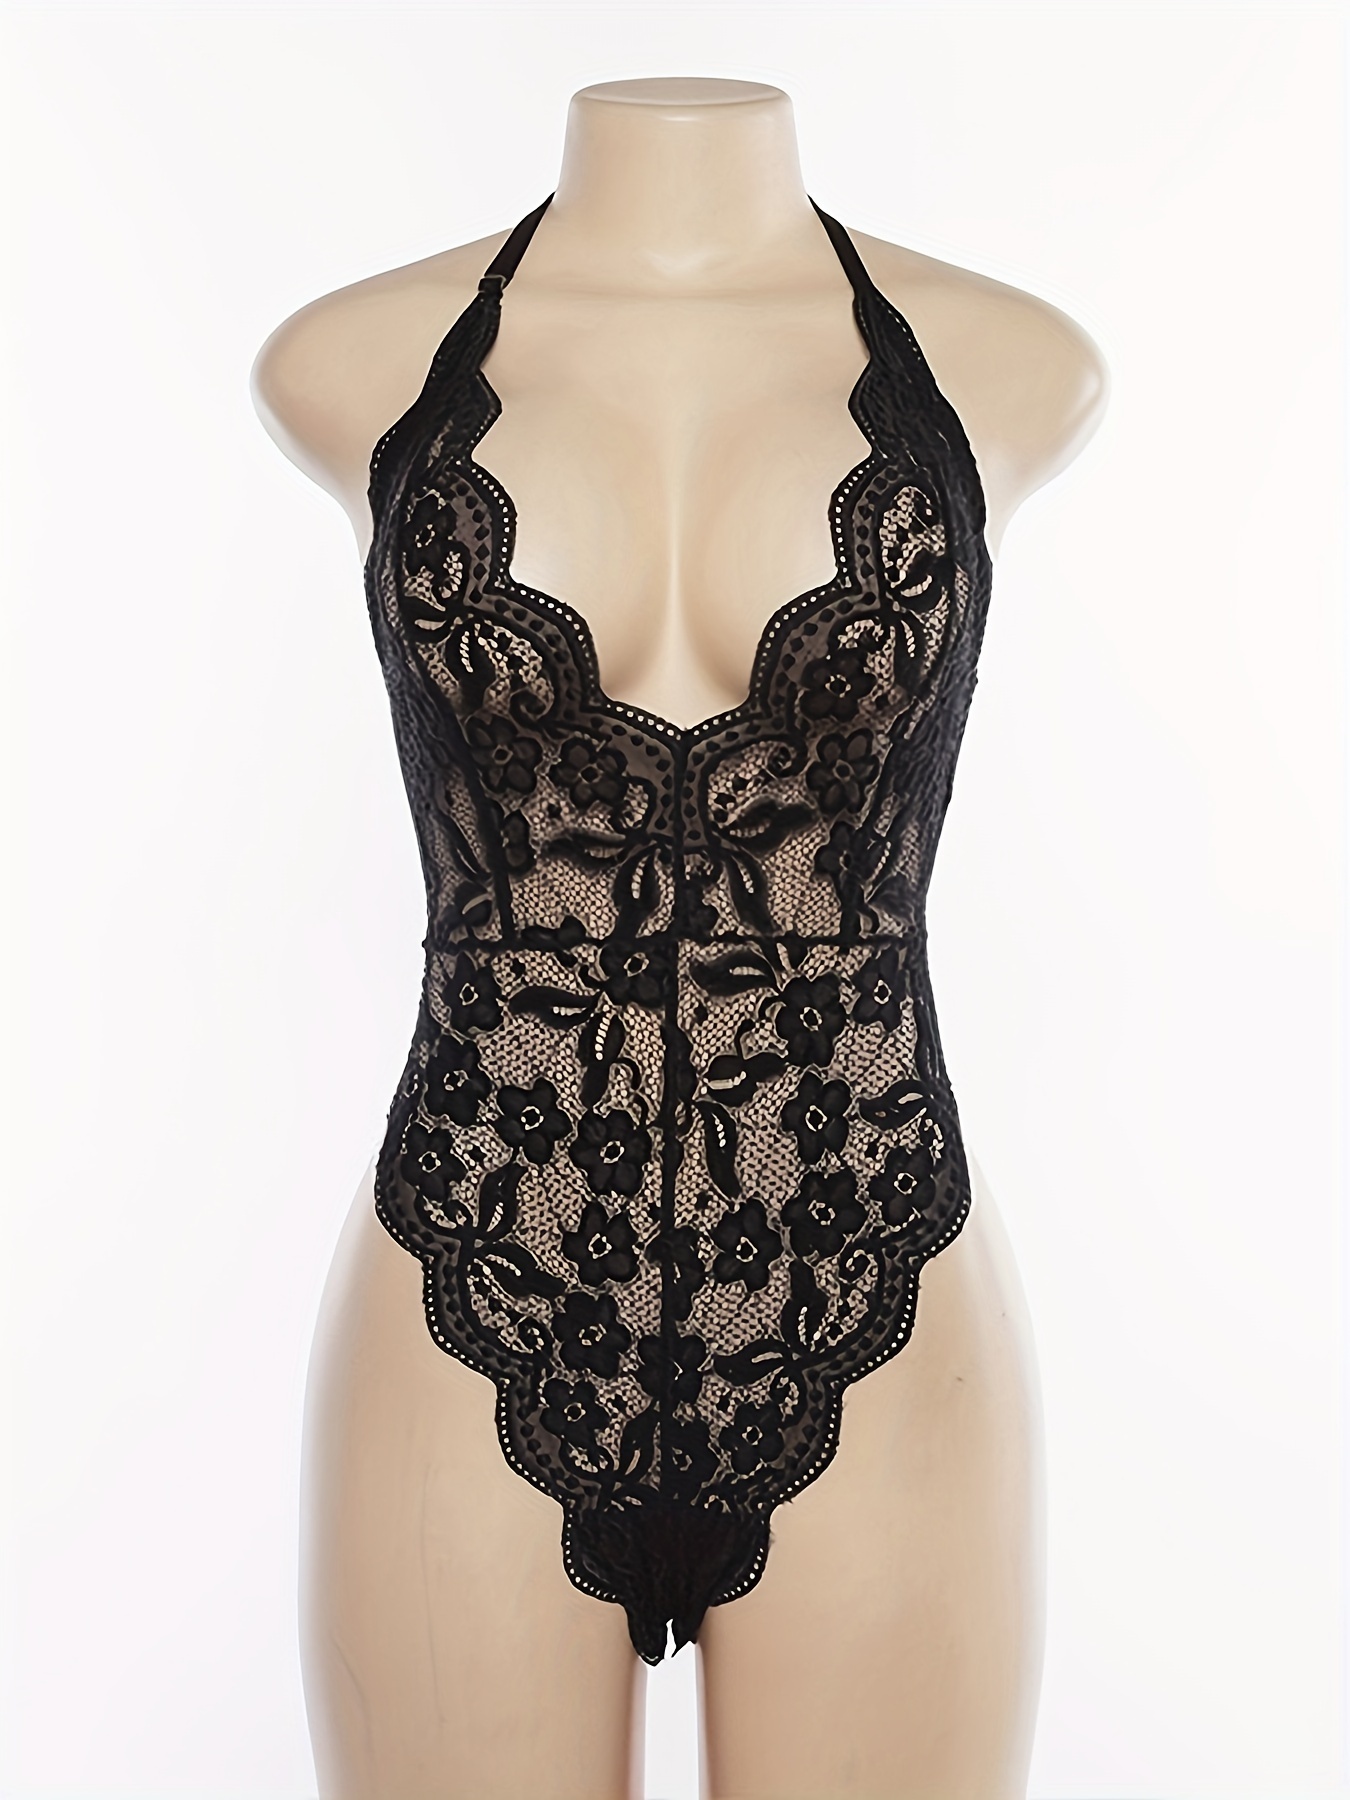 Women's Sexy Black Floral Lace Hollow Bodysuit with Spaghetti Straps and  Mesh Teddy Lingerie - Seductive Underwear for a Sensual Look